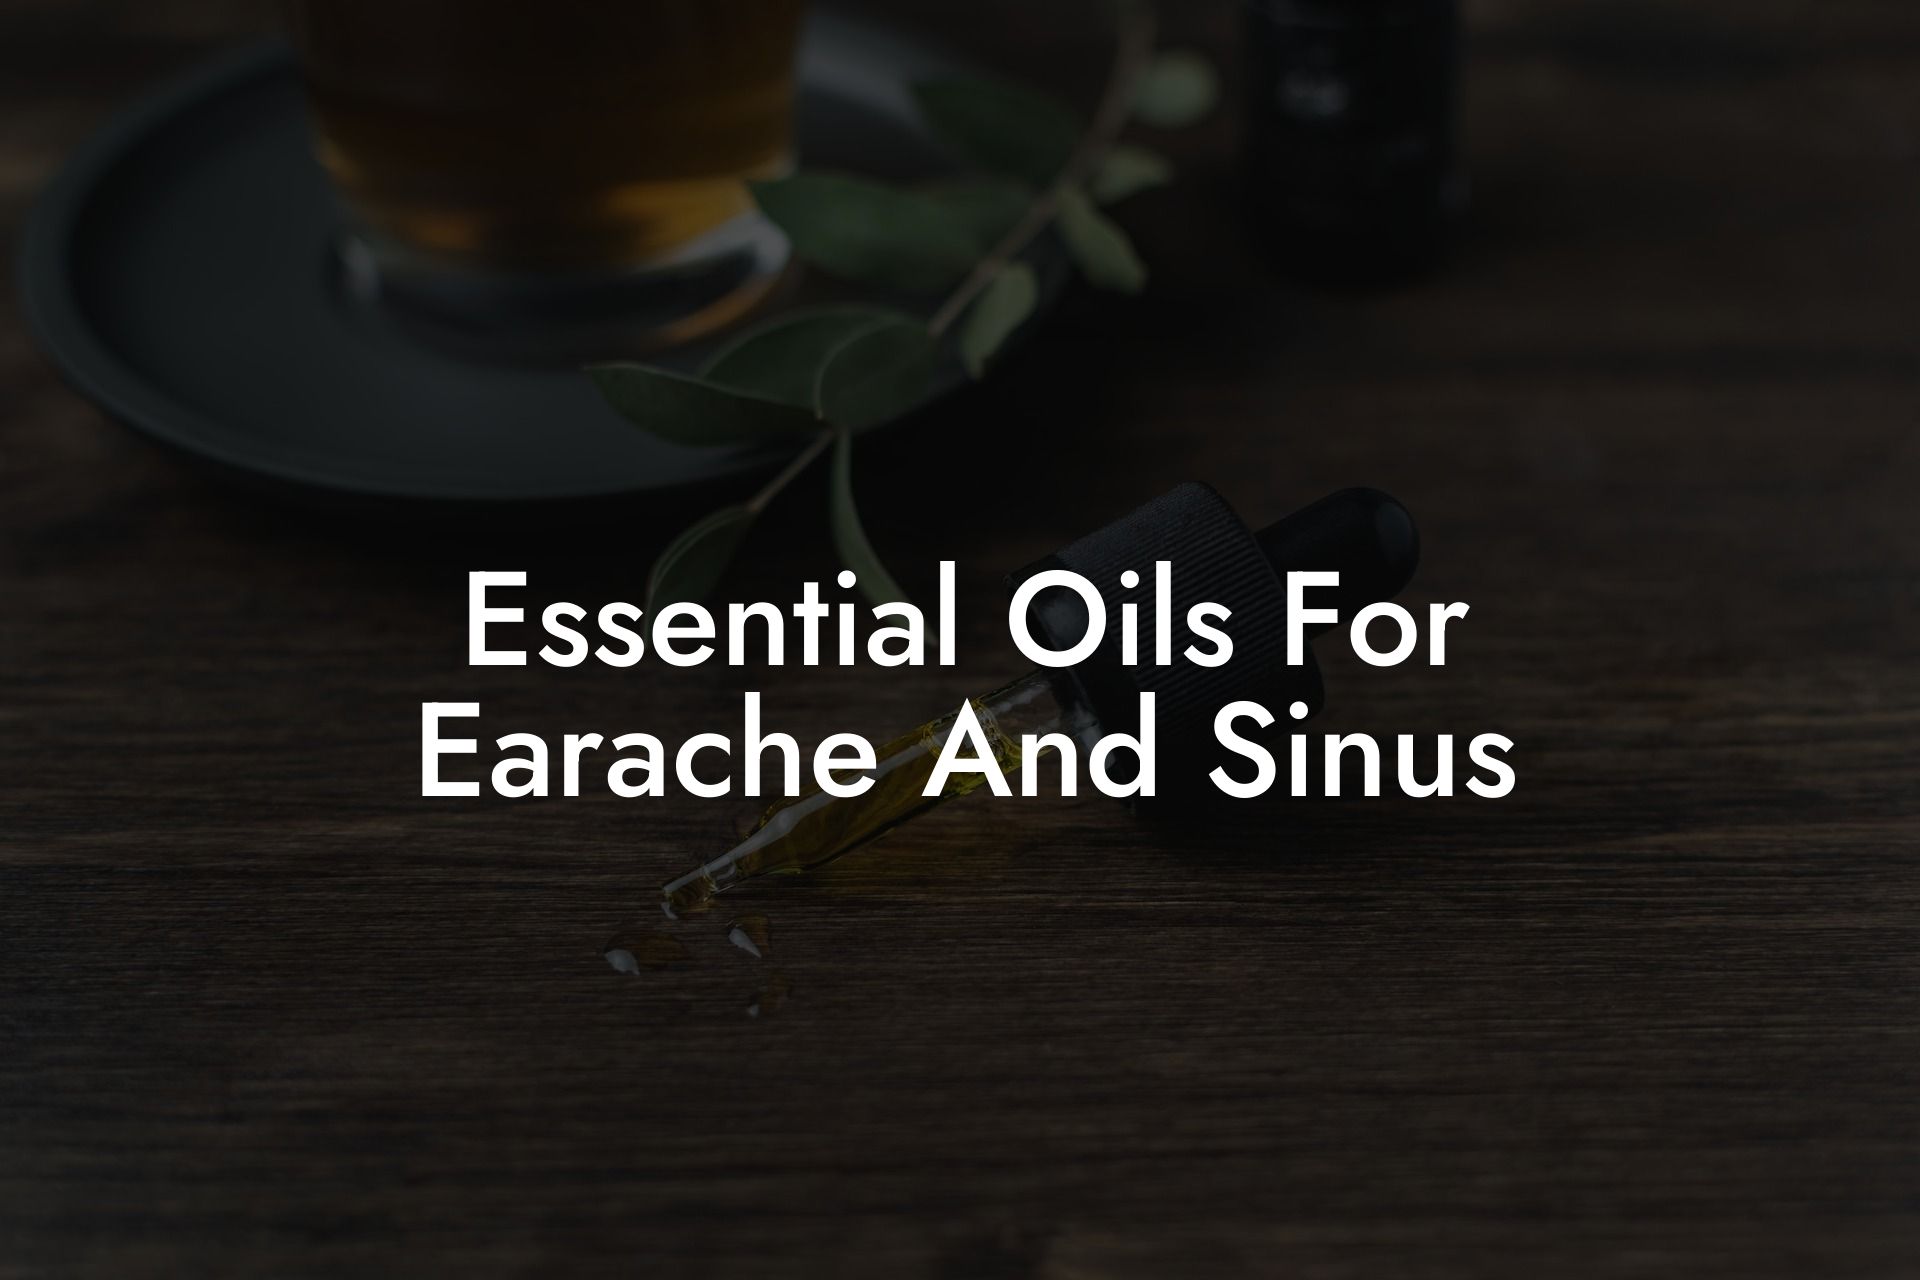 Essential Oils For Earache And Sinus